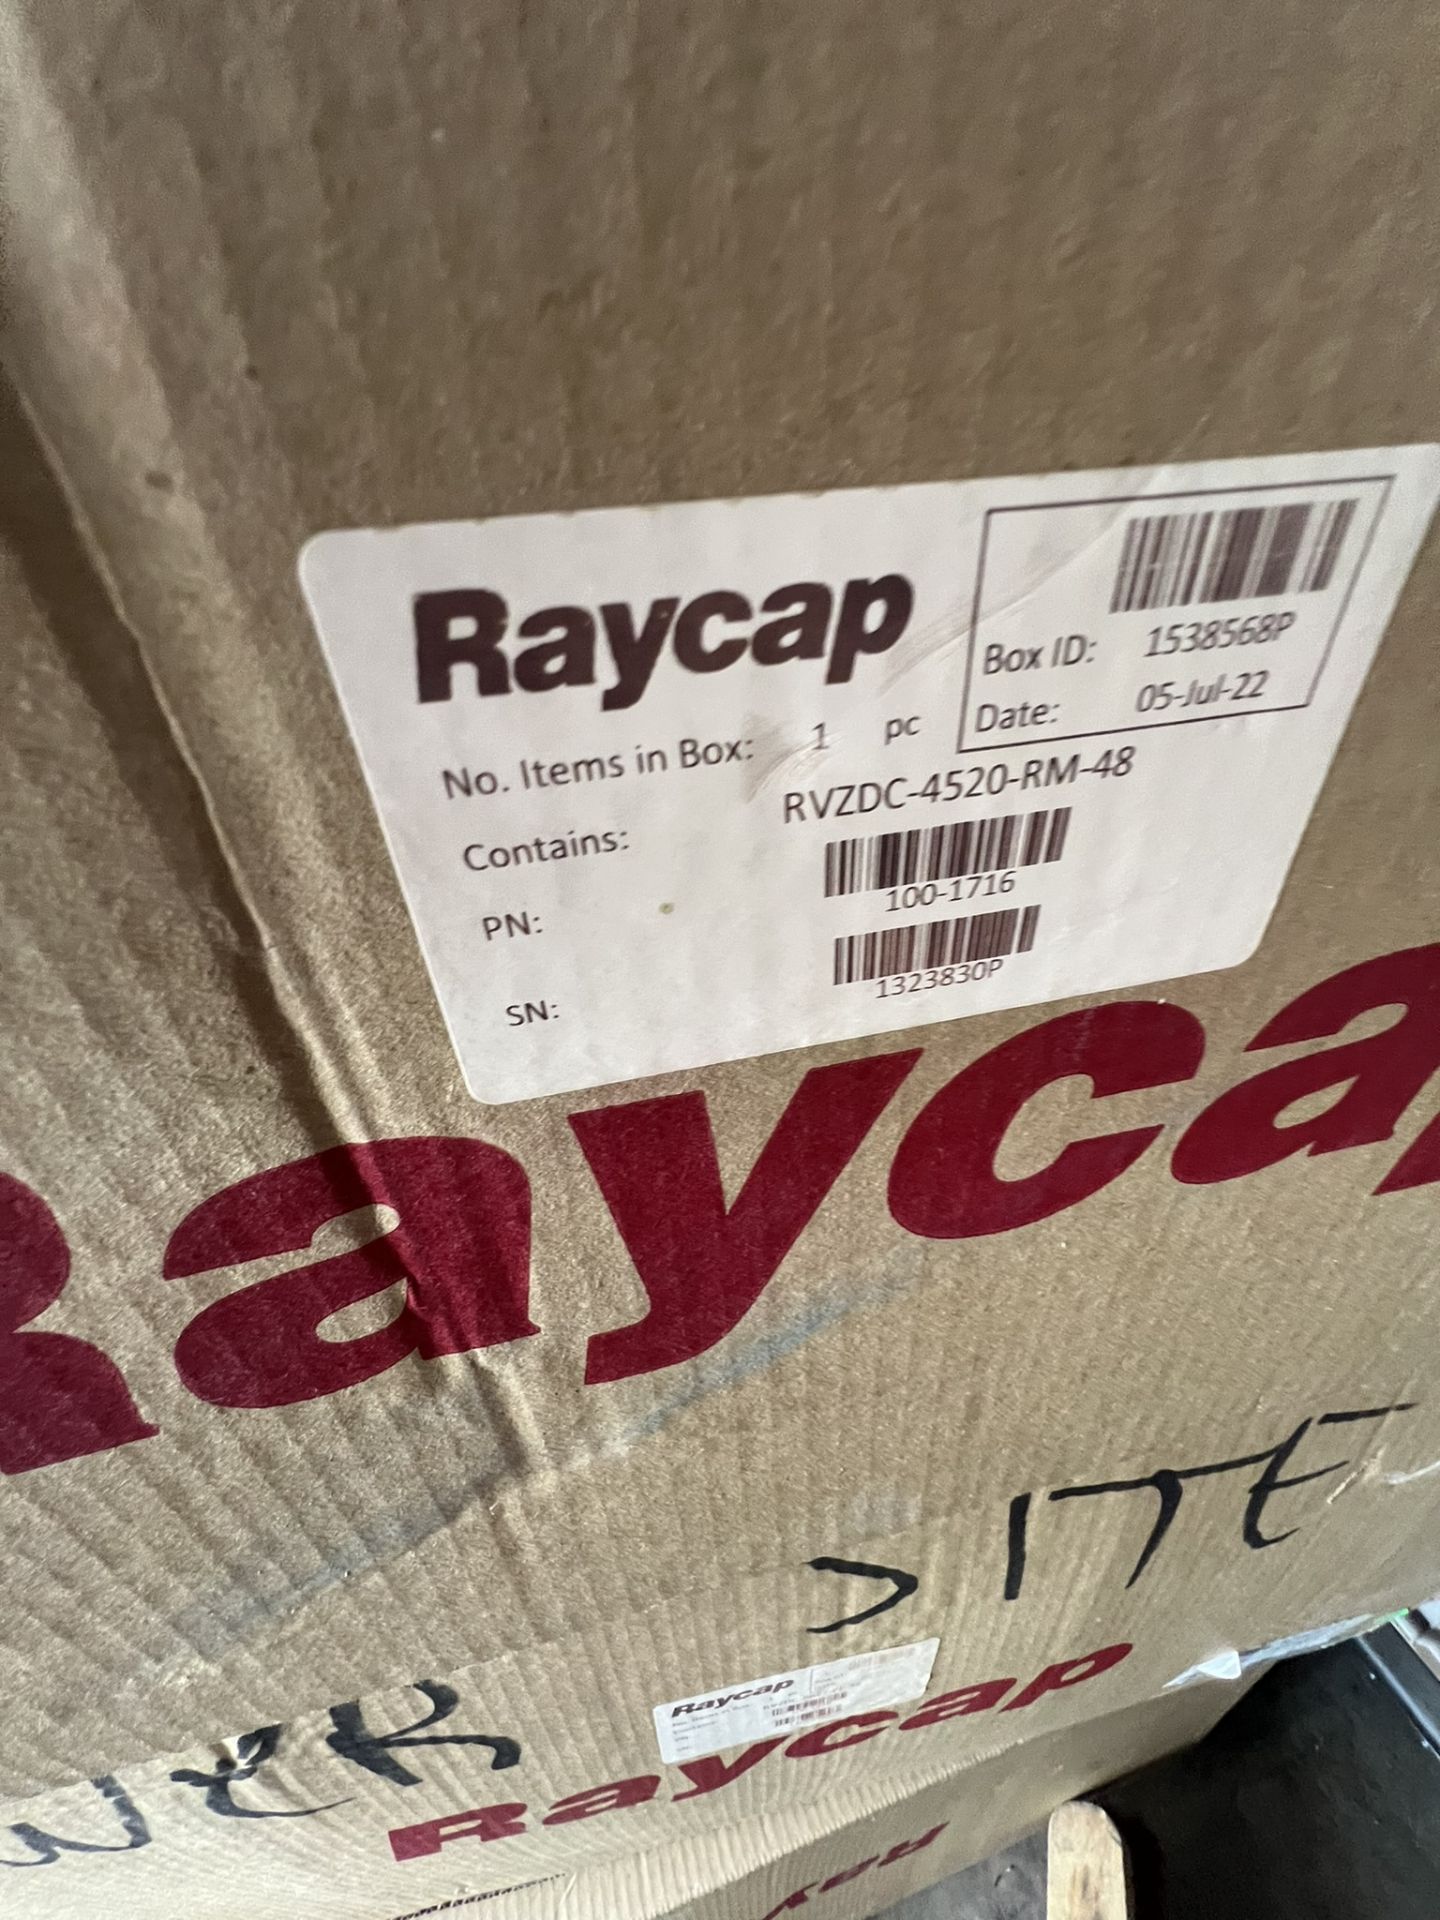 (2) 12 Position Raycap OVP and OVP Base Unit, Part Number RVZDC-4520-RM-48 - Image 4 of 4